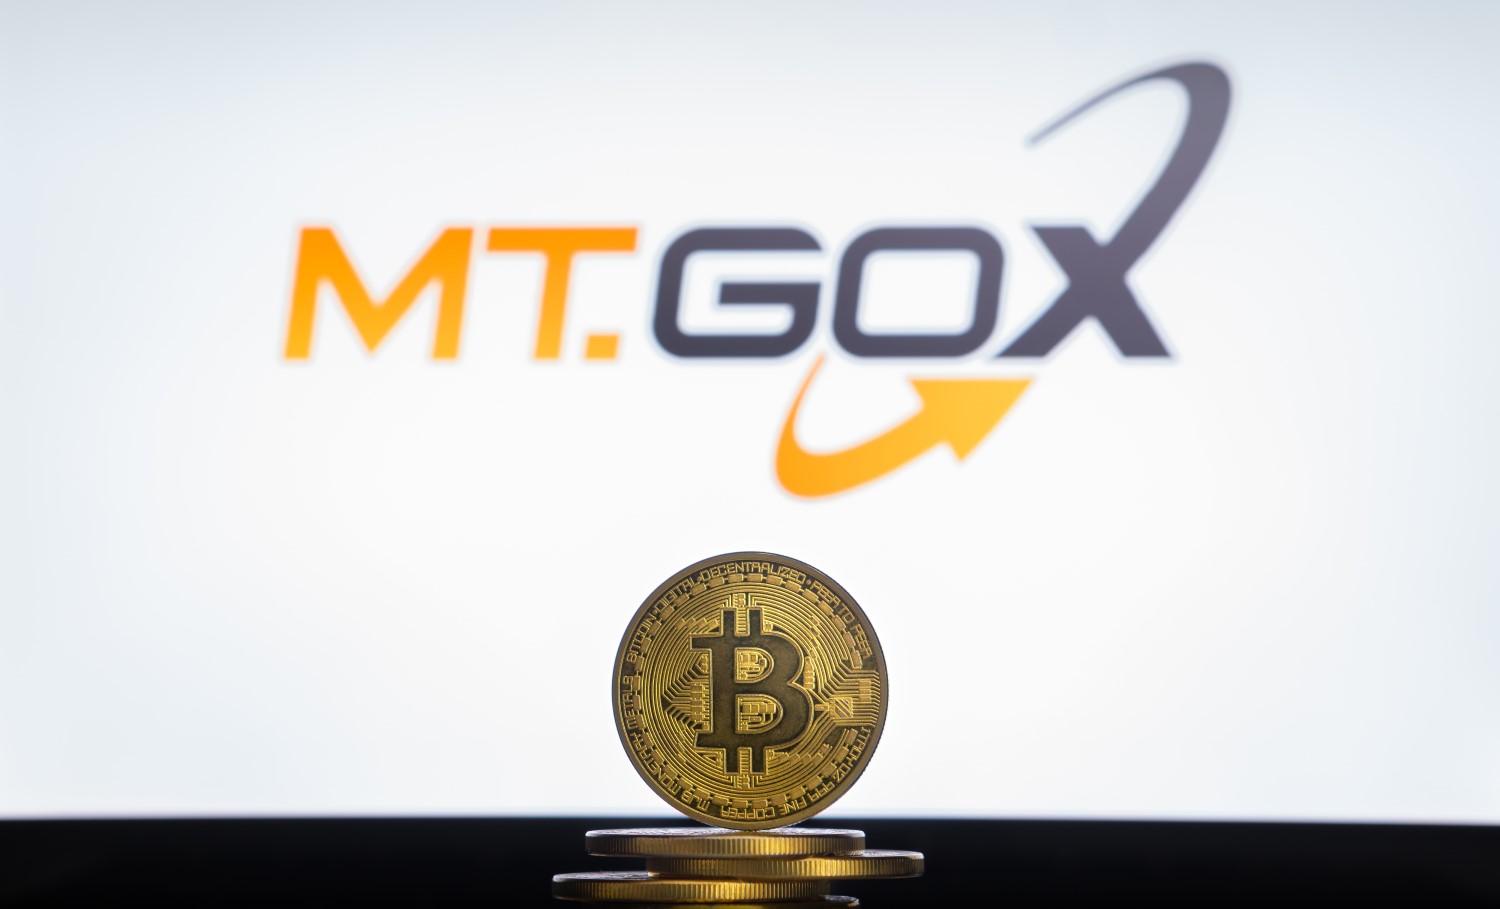 Investment Giant Fortress Issues New Buyout Offer For Mt Gox Creditor Claims